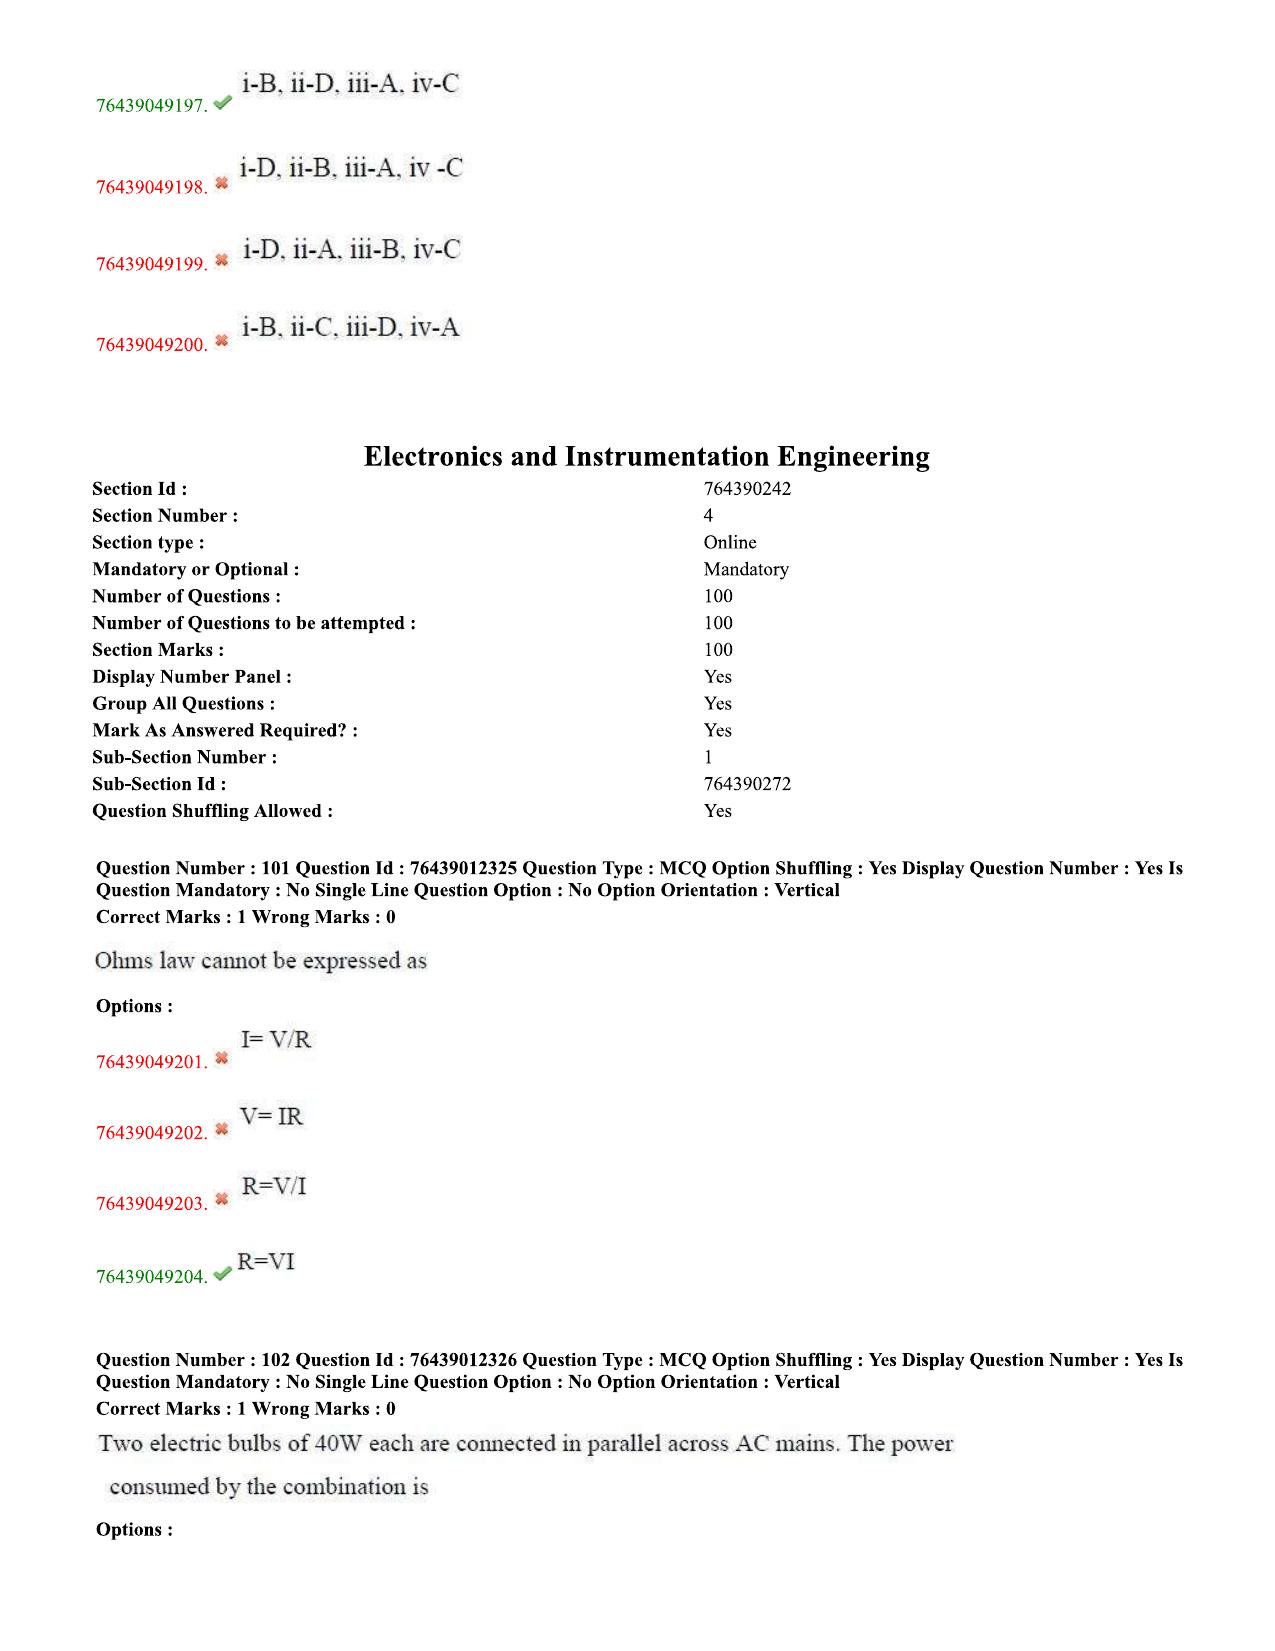 TS ECET 2020 Electronics and Instrumentation Engineering's Question Paper - Page 43